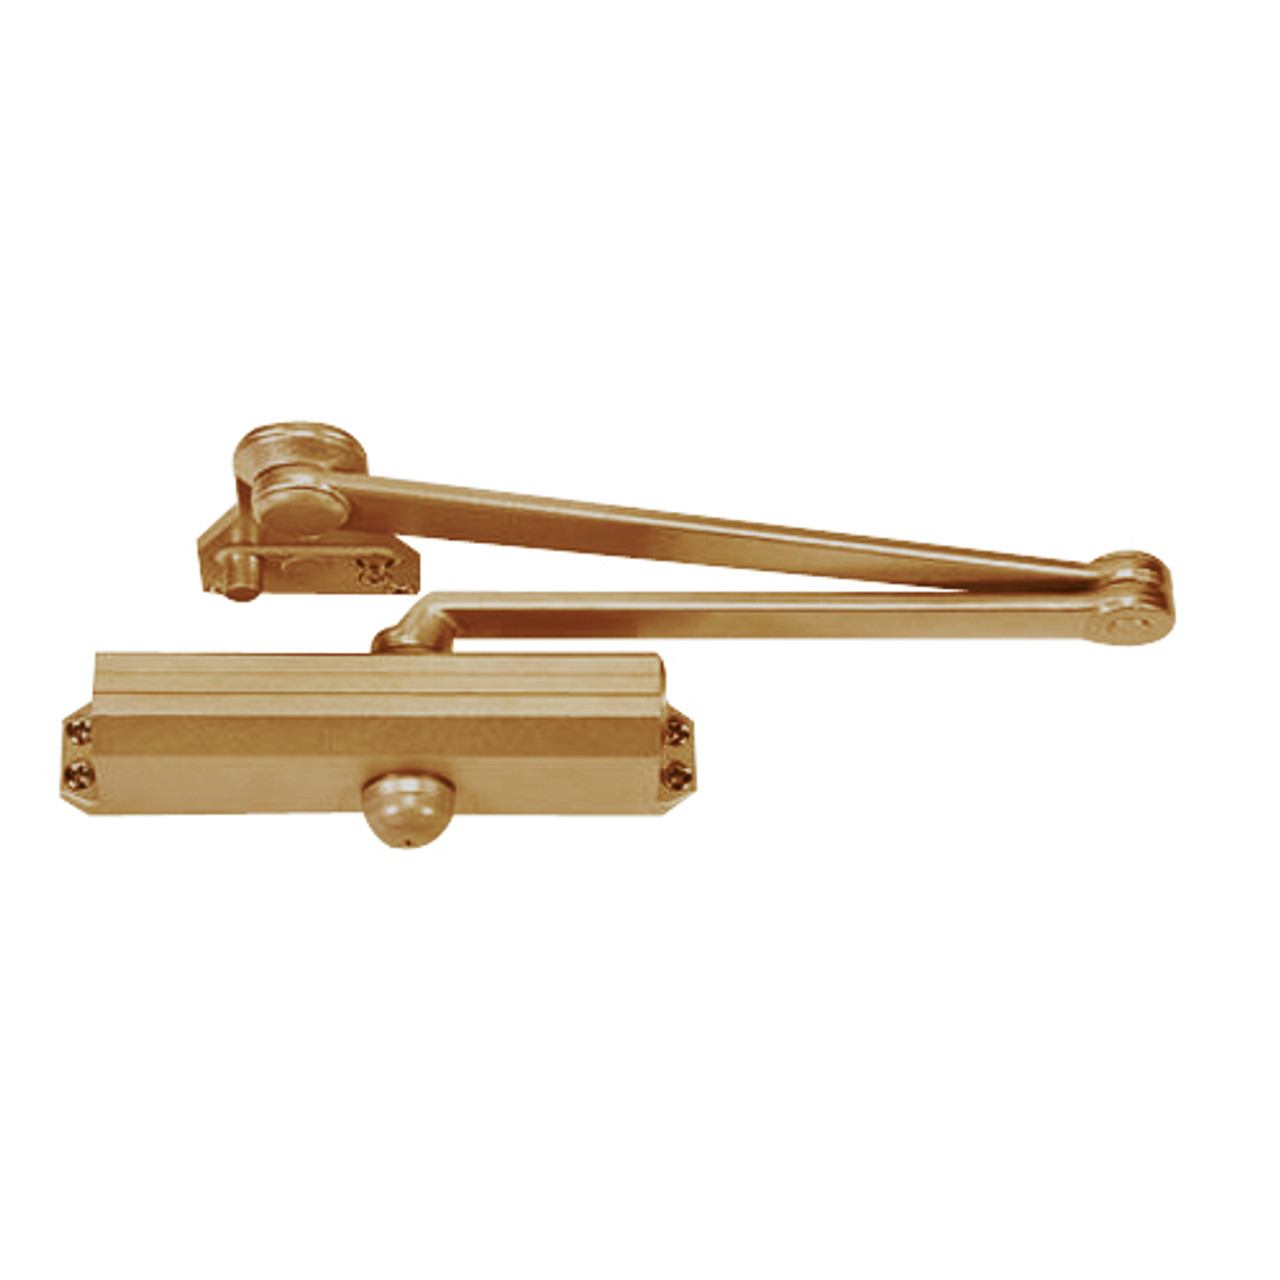 CLP1601-691 Norton 1600 Series Non Hold Open Adjustable Door Closer with CloserPlus Arm in Dull Bronze Finish